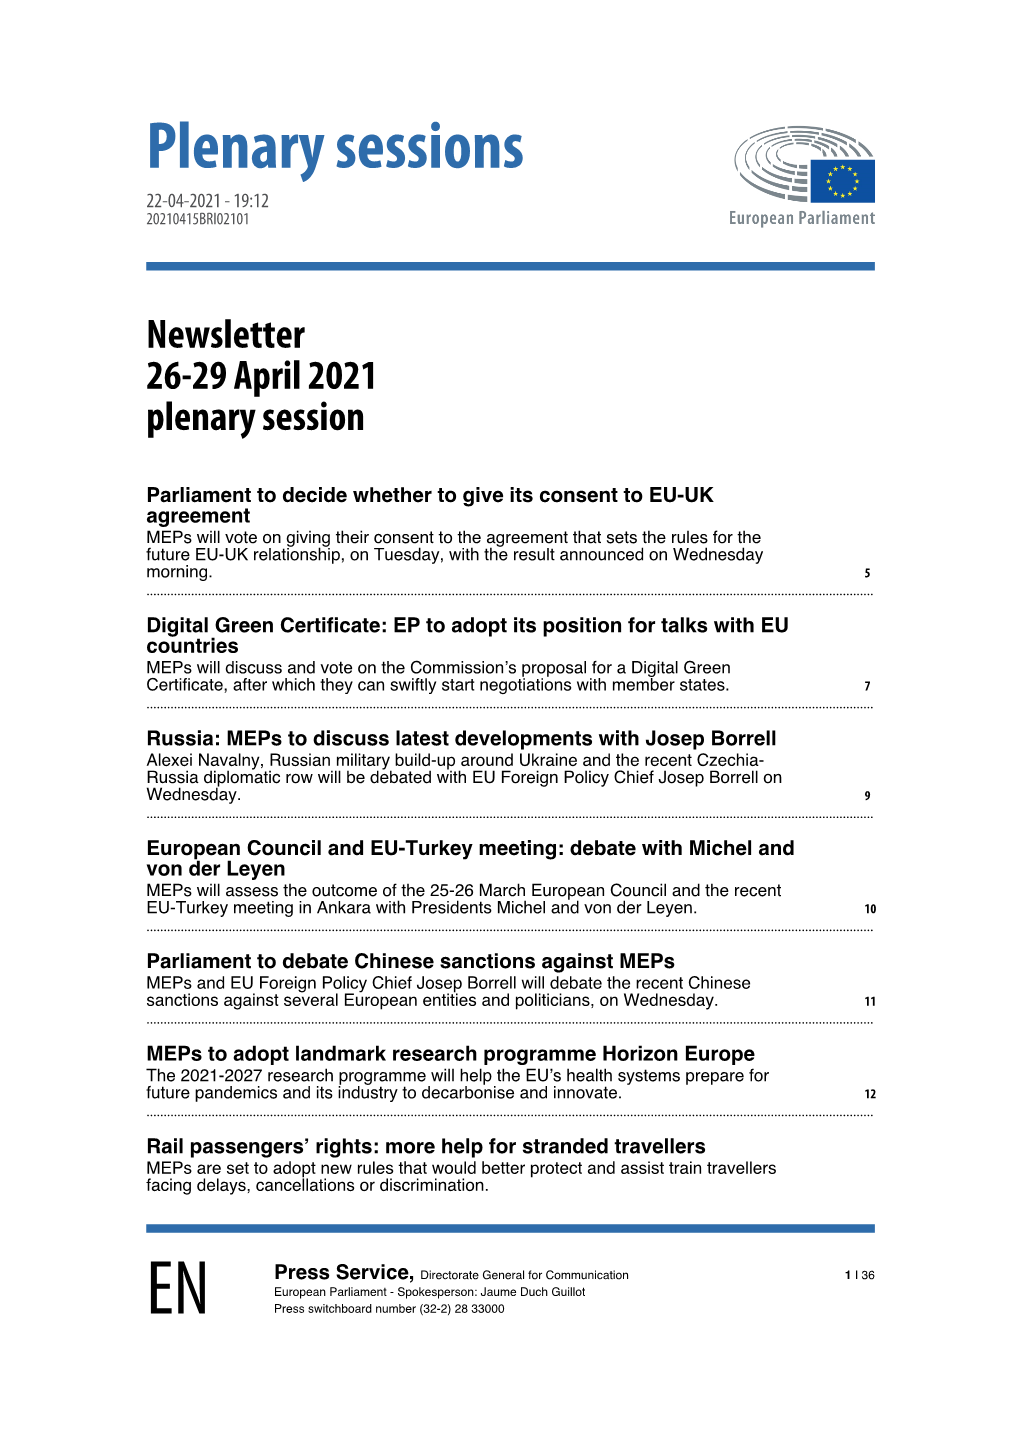 Download Briefing in PDF Format